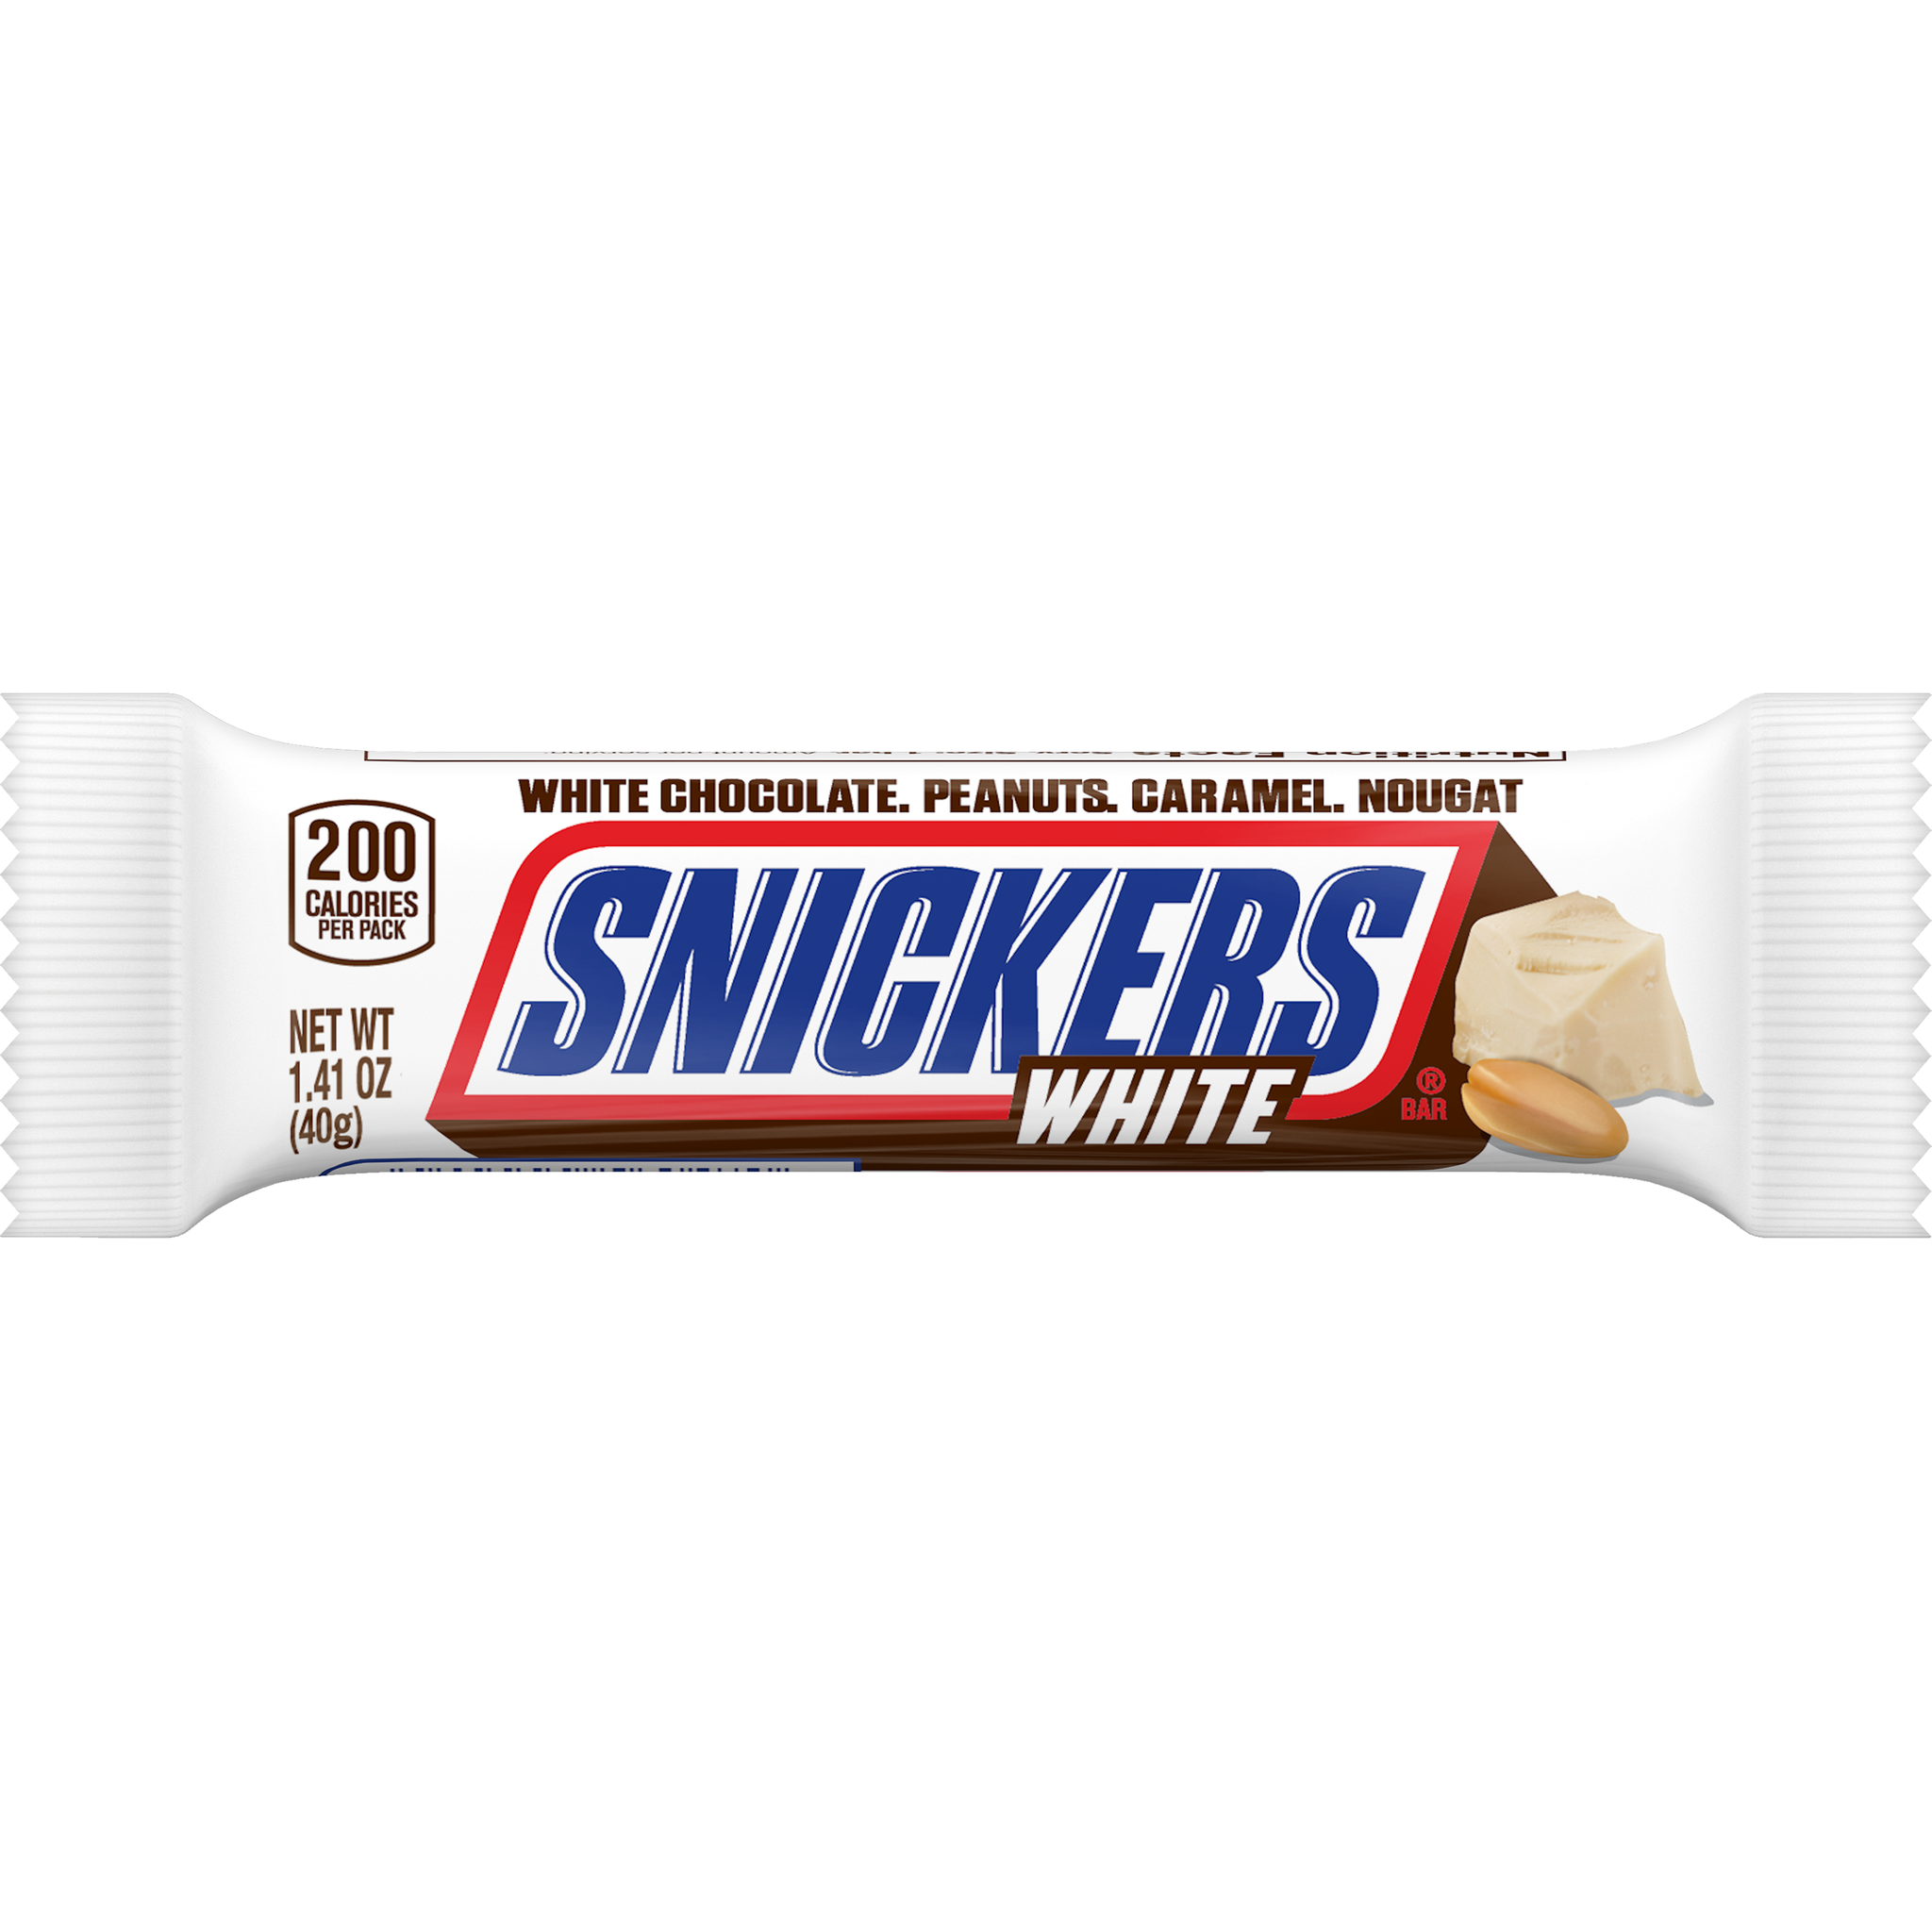 White Snickers | lupon.gov.ph